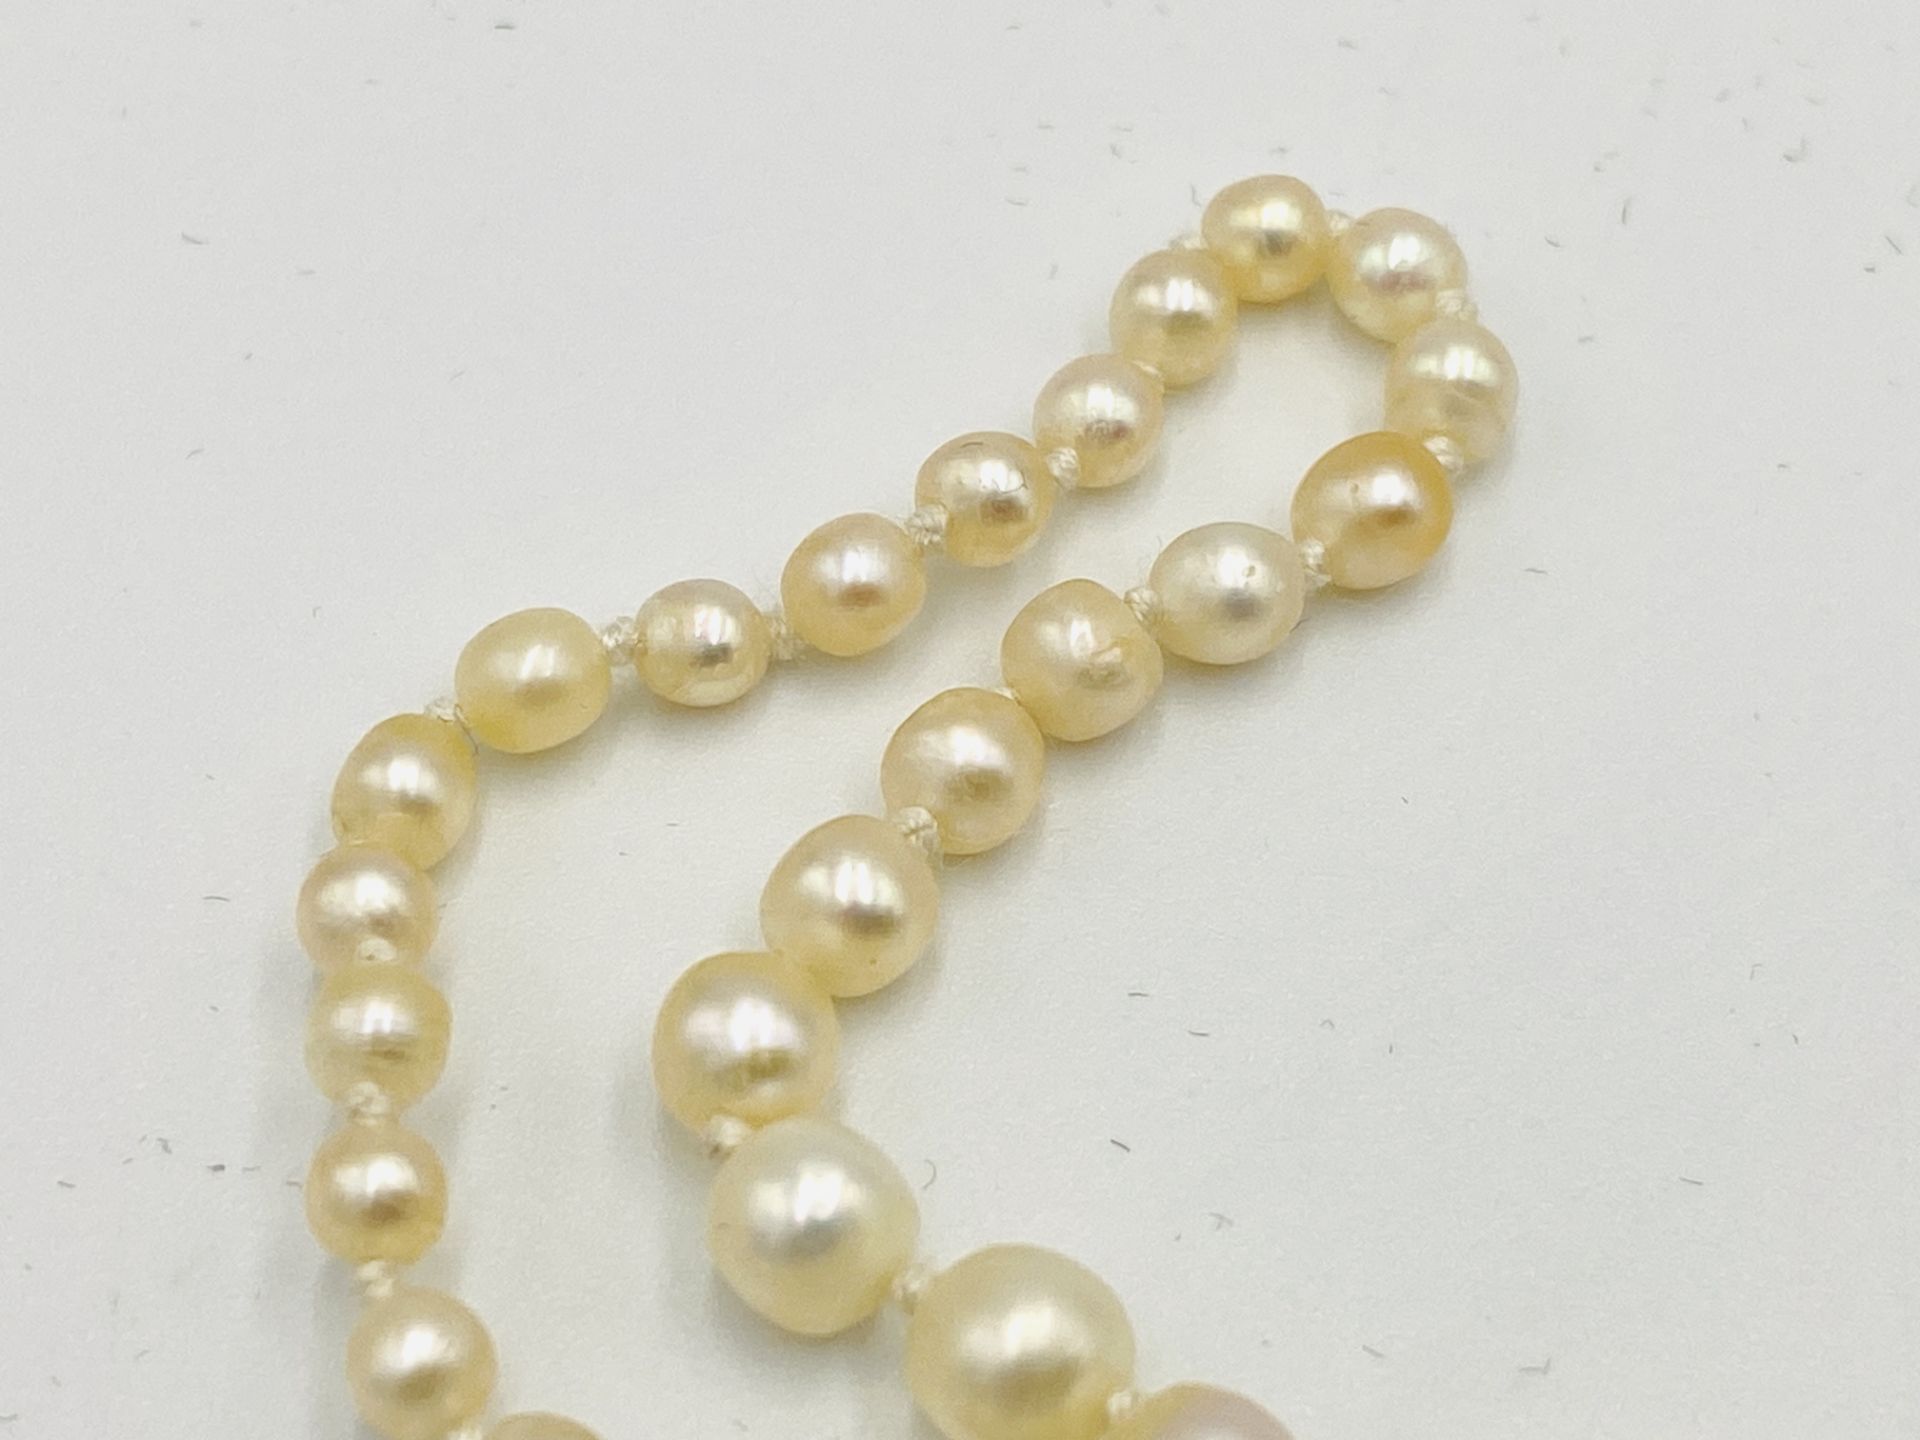 Graduated pearl necklace with certificate - Image 2 of 6